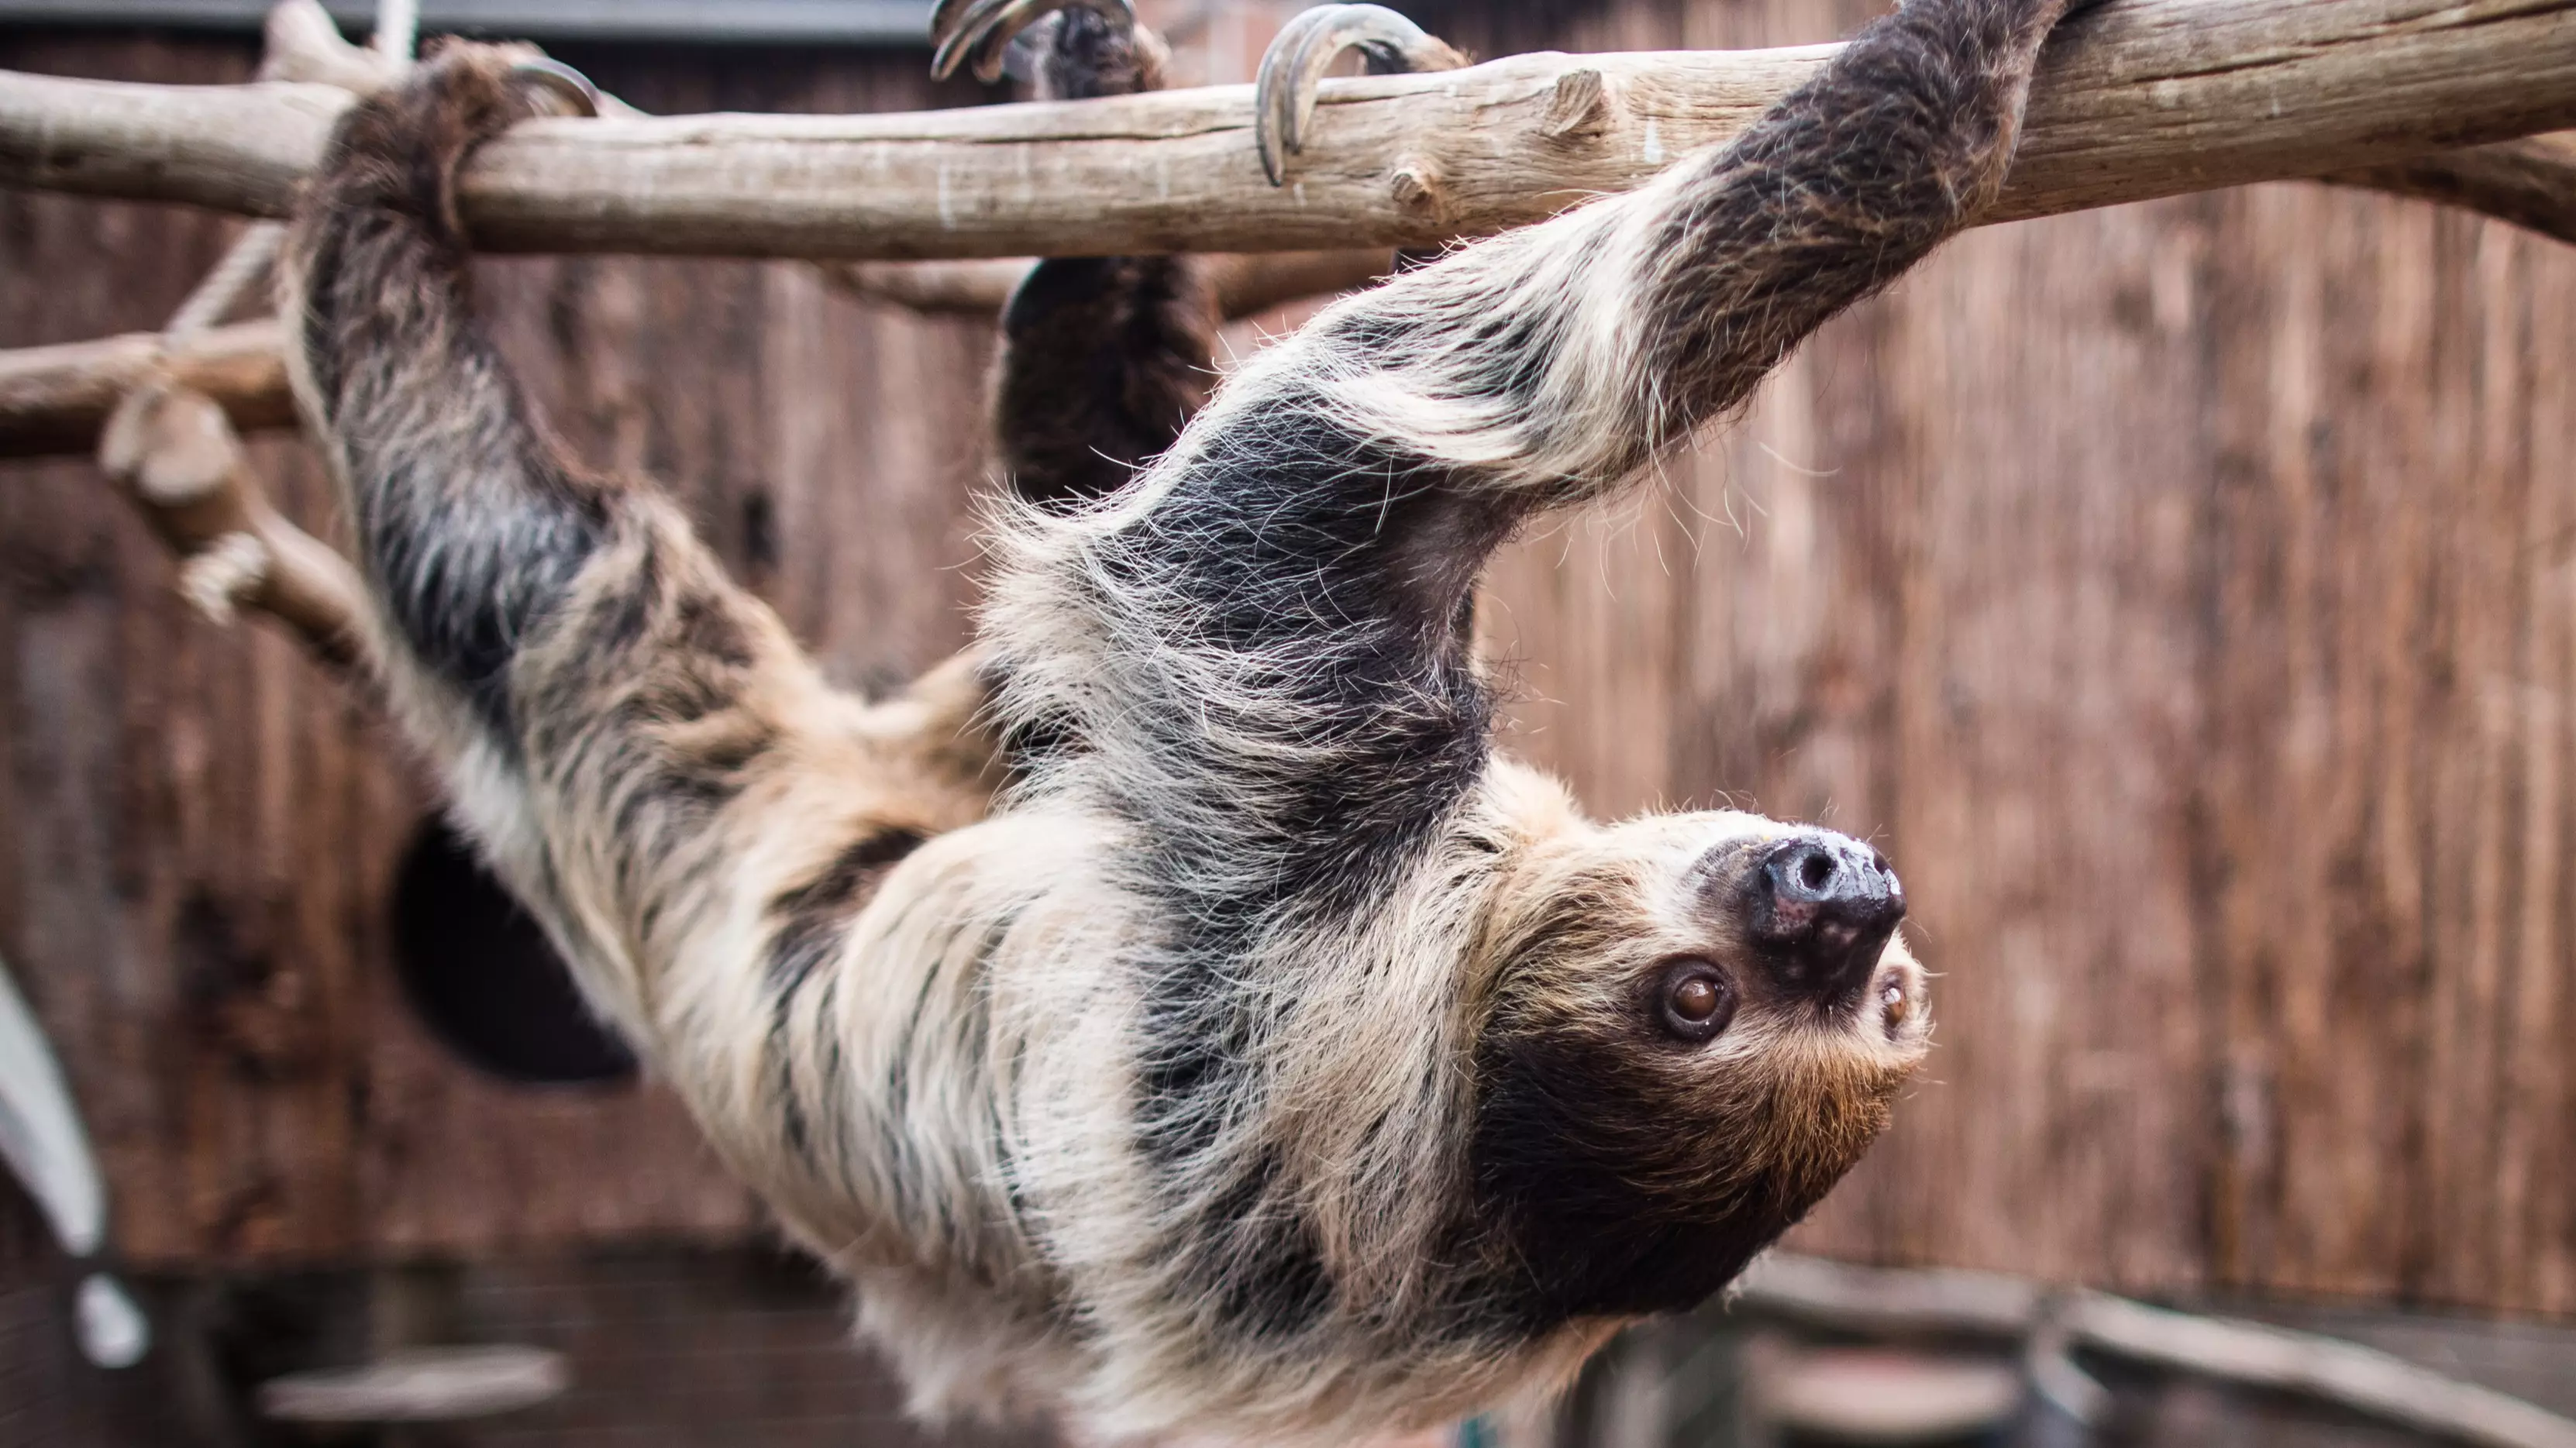 A Sloth Retirement Home Has Been Set Up In The UK